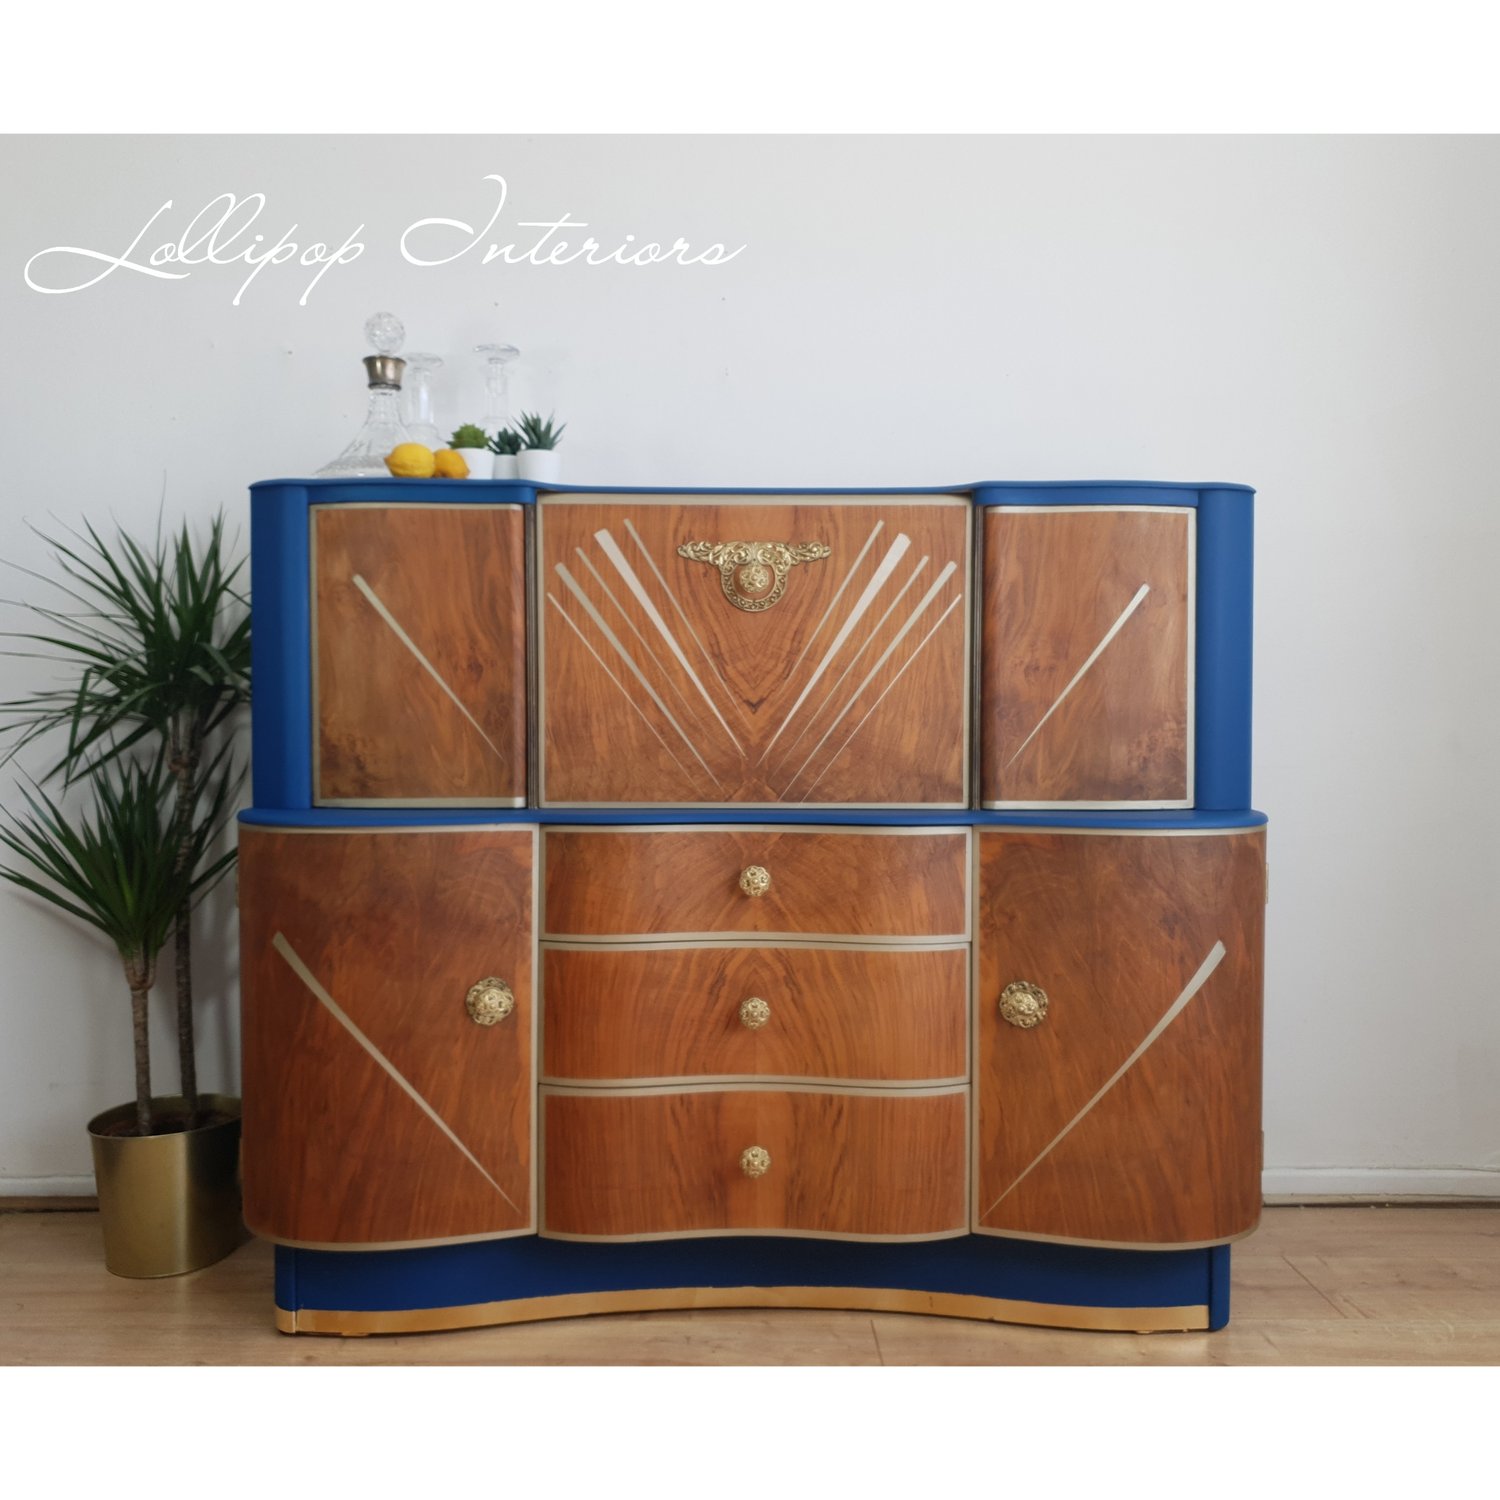 Image of Beautility cocktail bar cabinet 